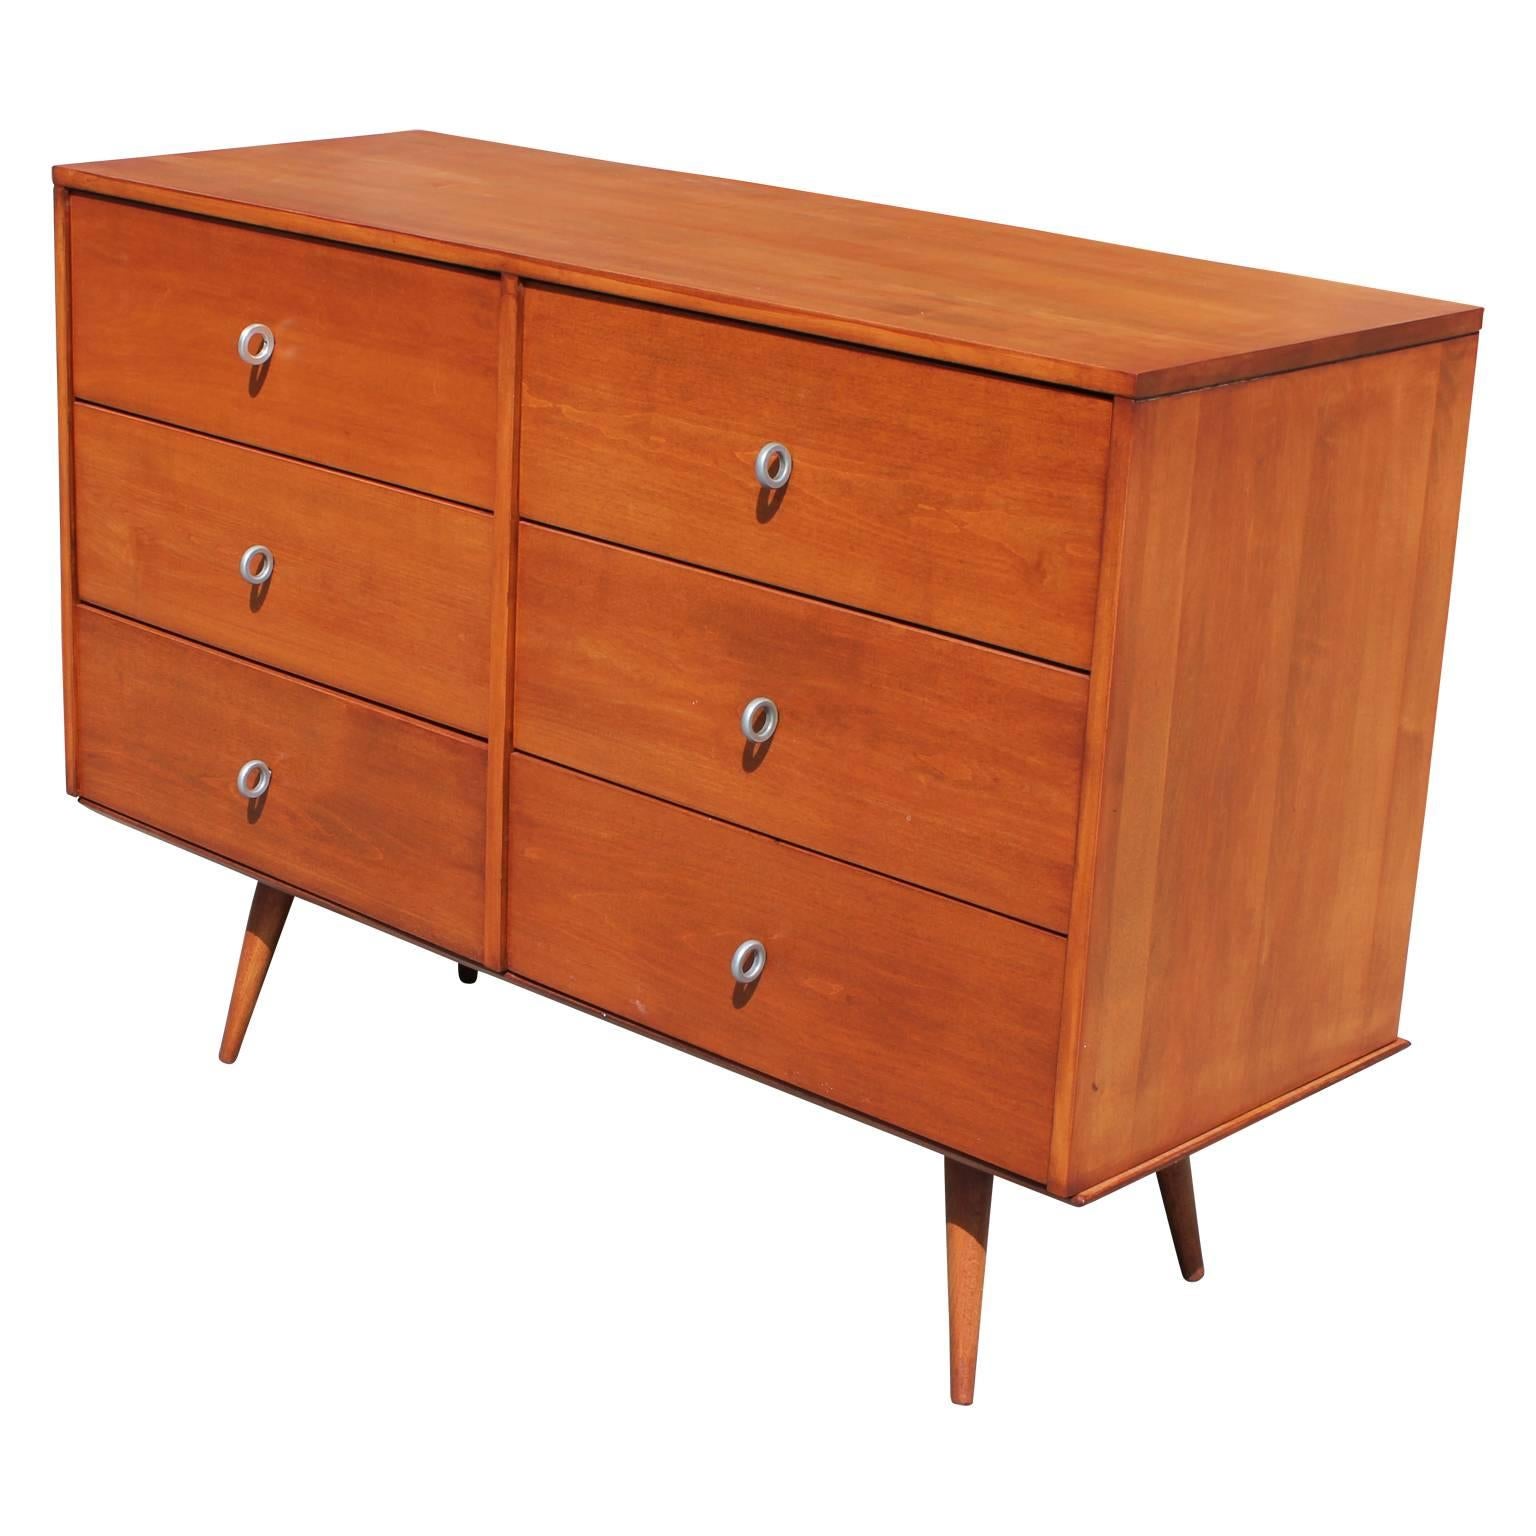 Pair of Mid-Century Modern maple wood dressers / chest of drawers by Paul McCobb for Planner Group. These pieces provides plenty of storage with six drawers and is fashioned with McCobb's signature aluminium pulls.